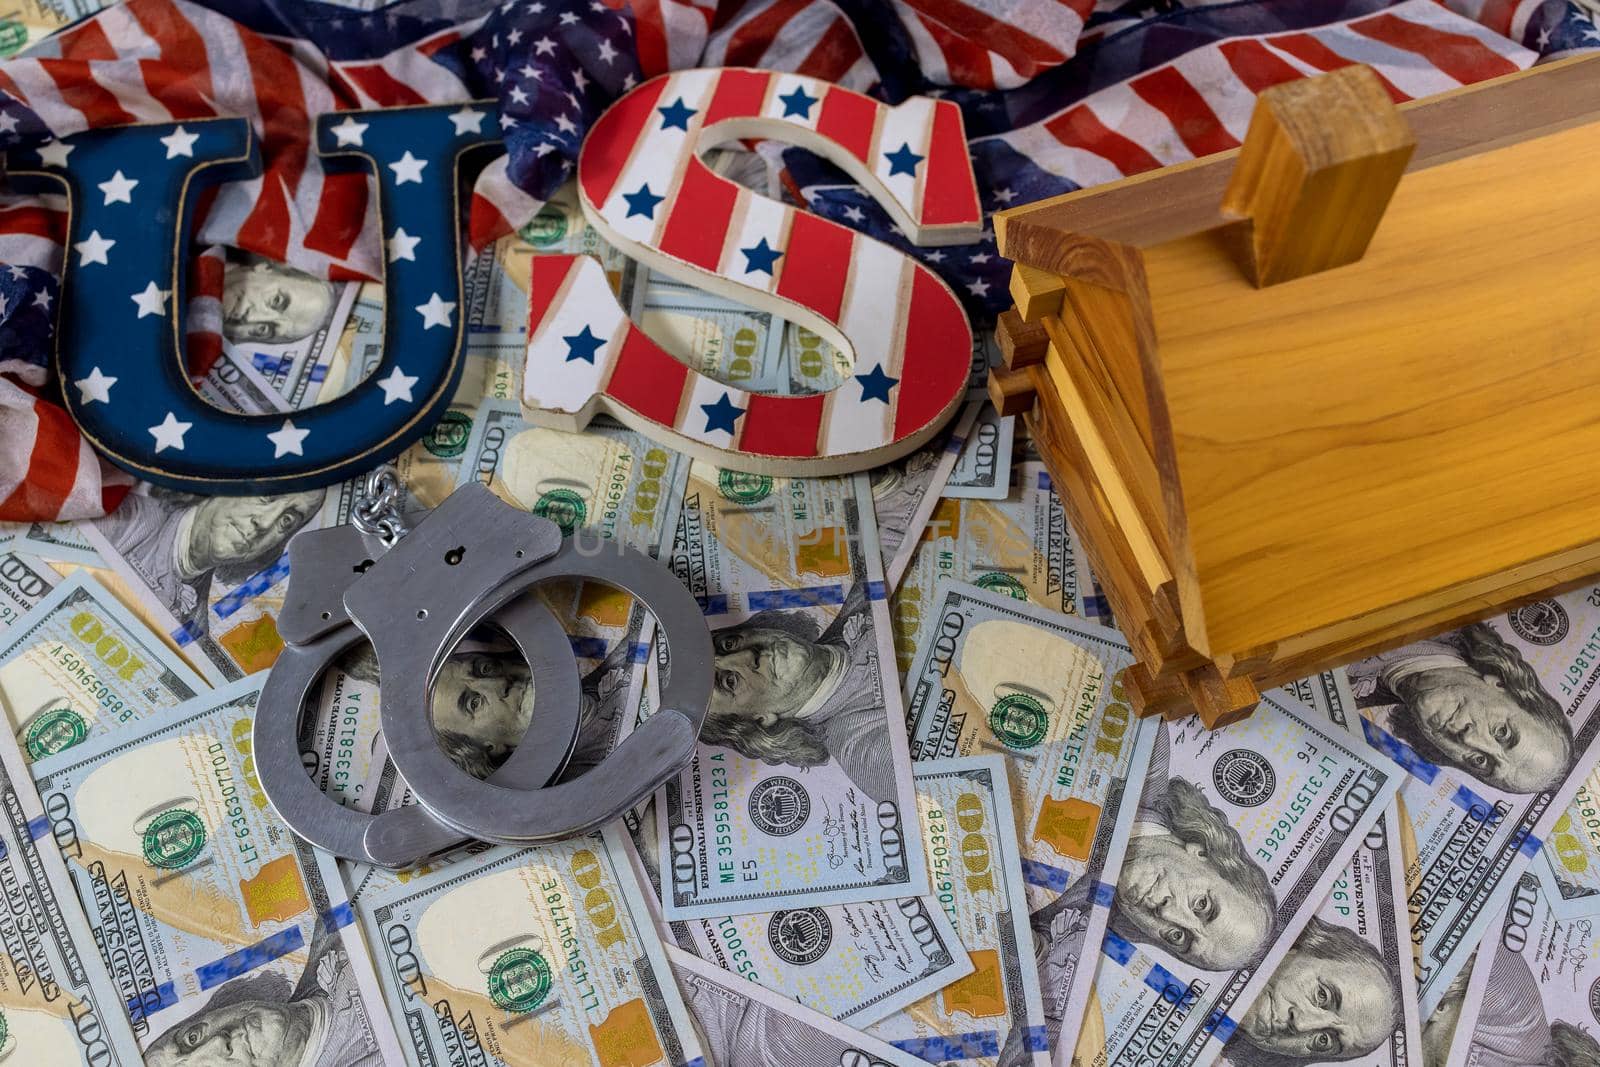 Judge american sanctions the court imposed an arrest to on house of property with US dollars banknotes by ungvar